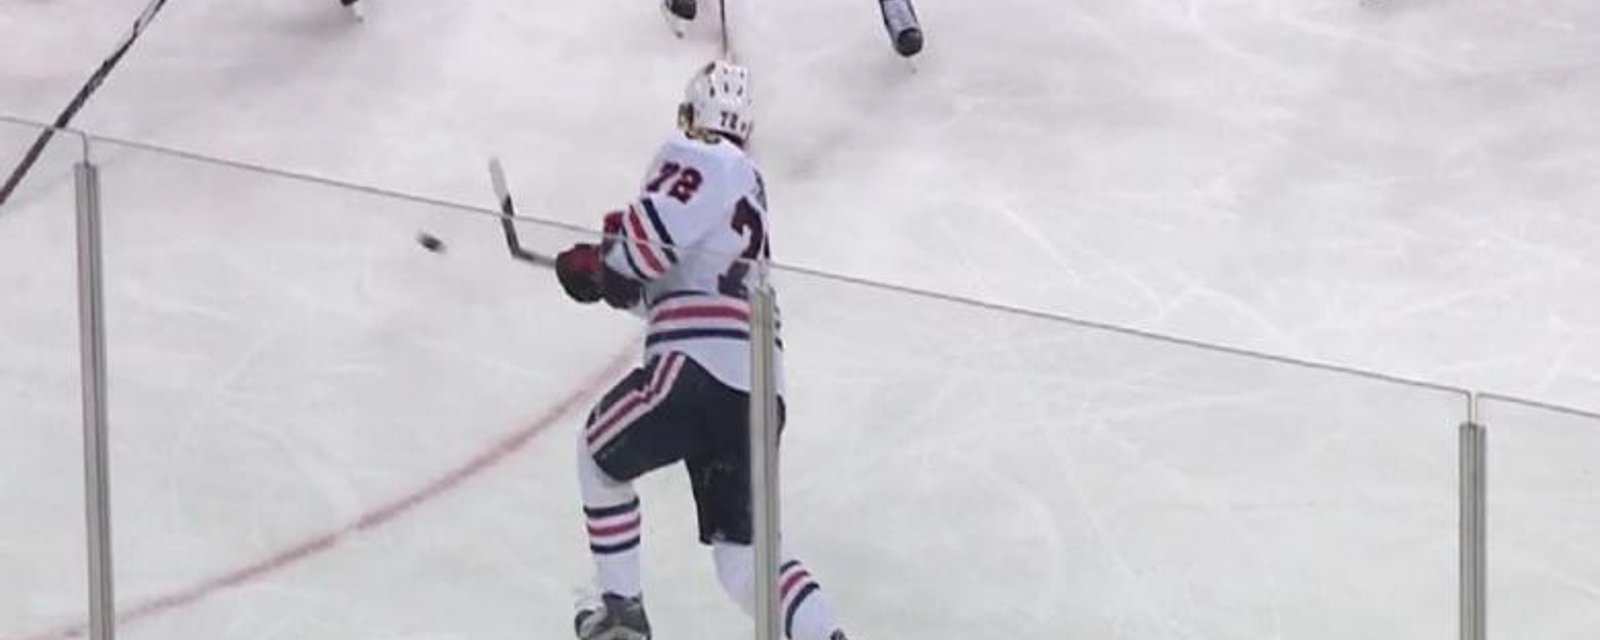 Panarin just continues to have a great rookie season!